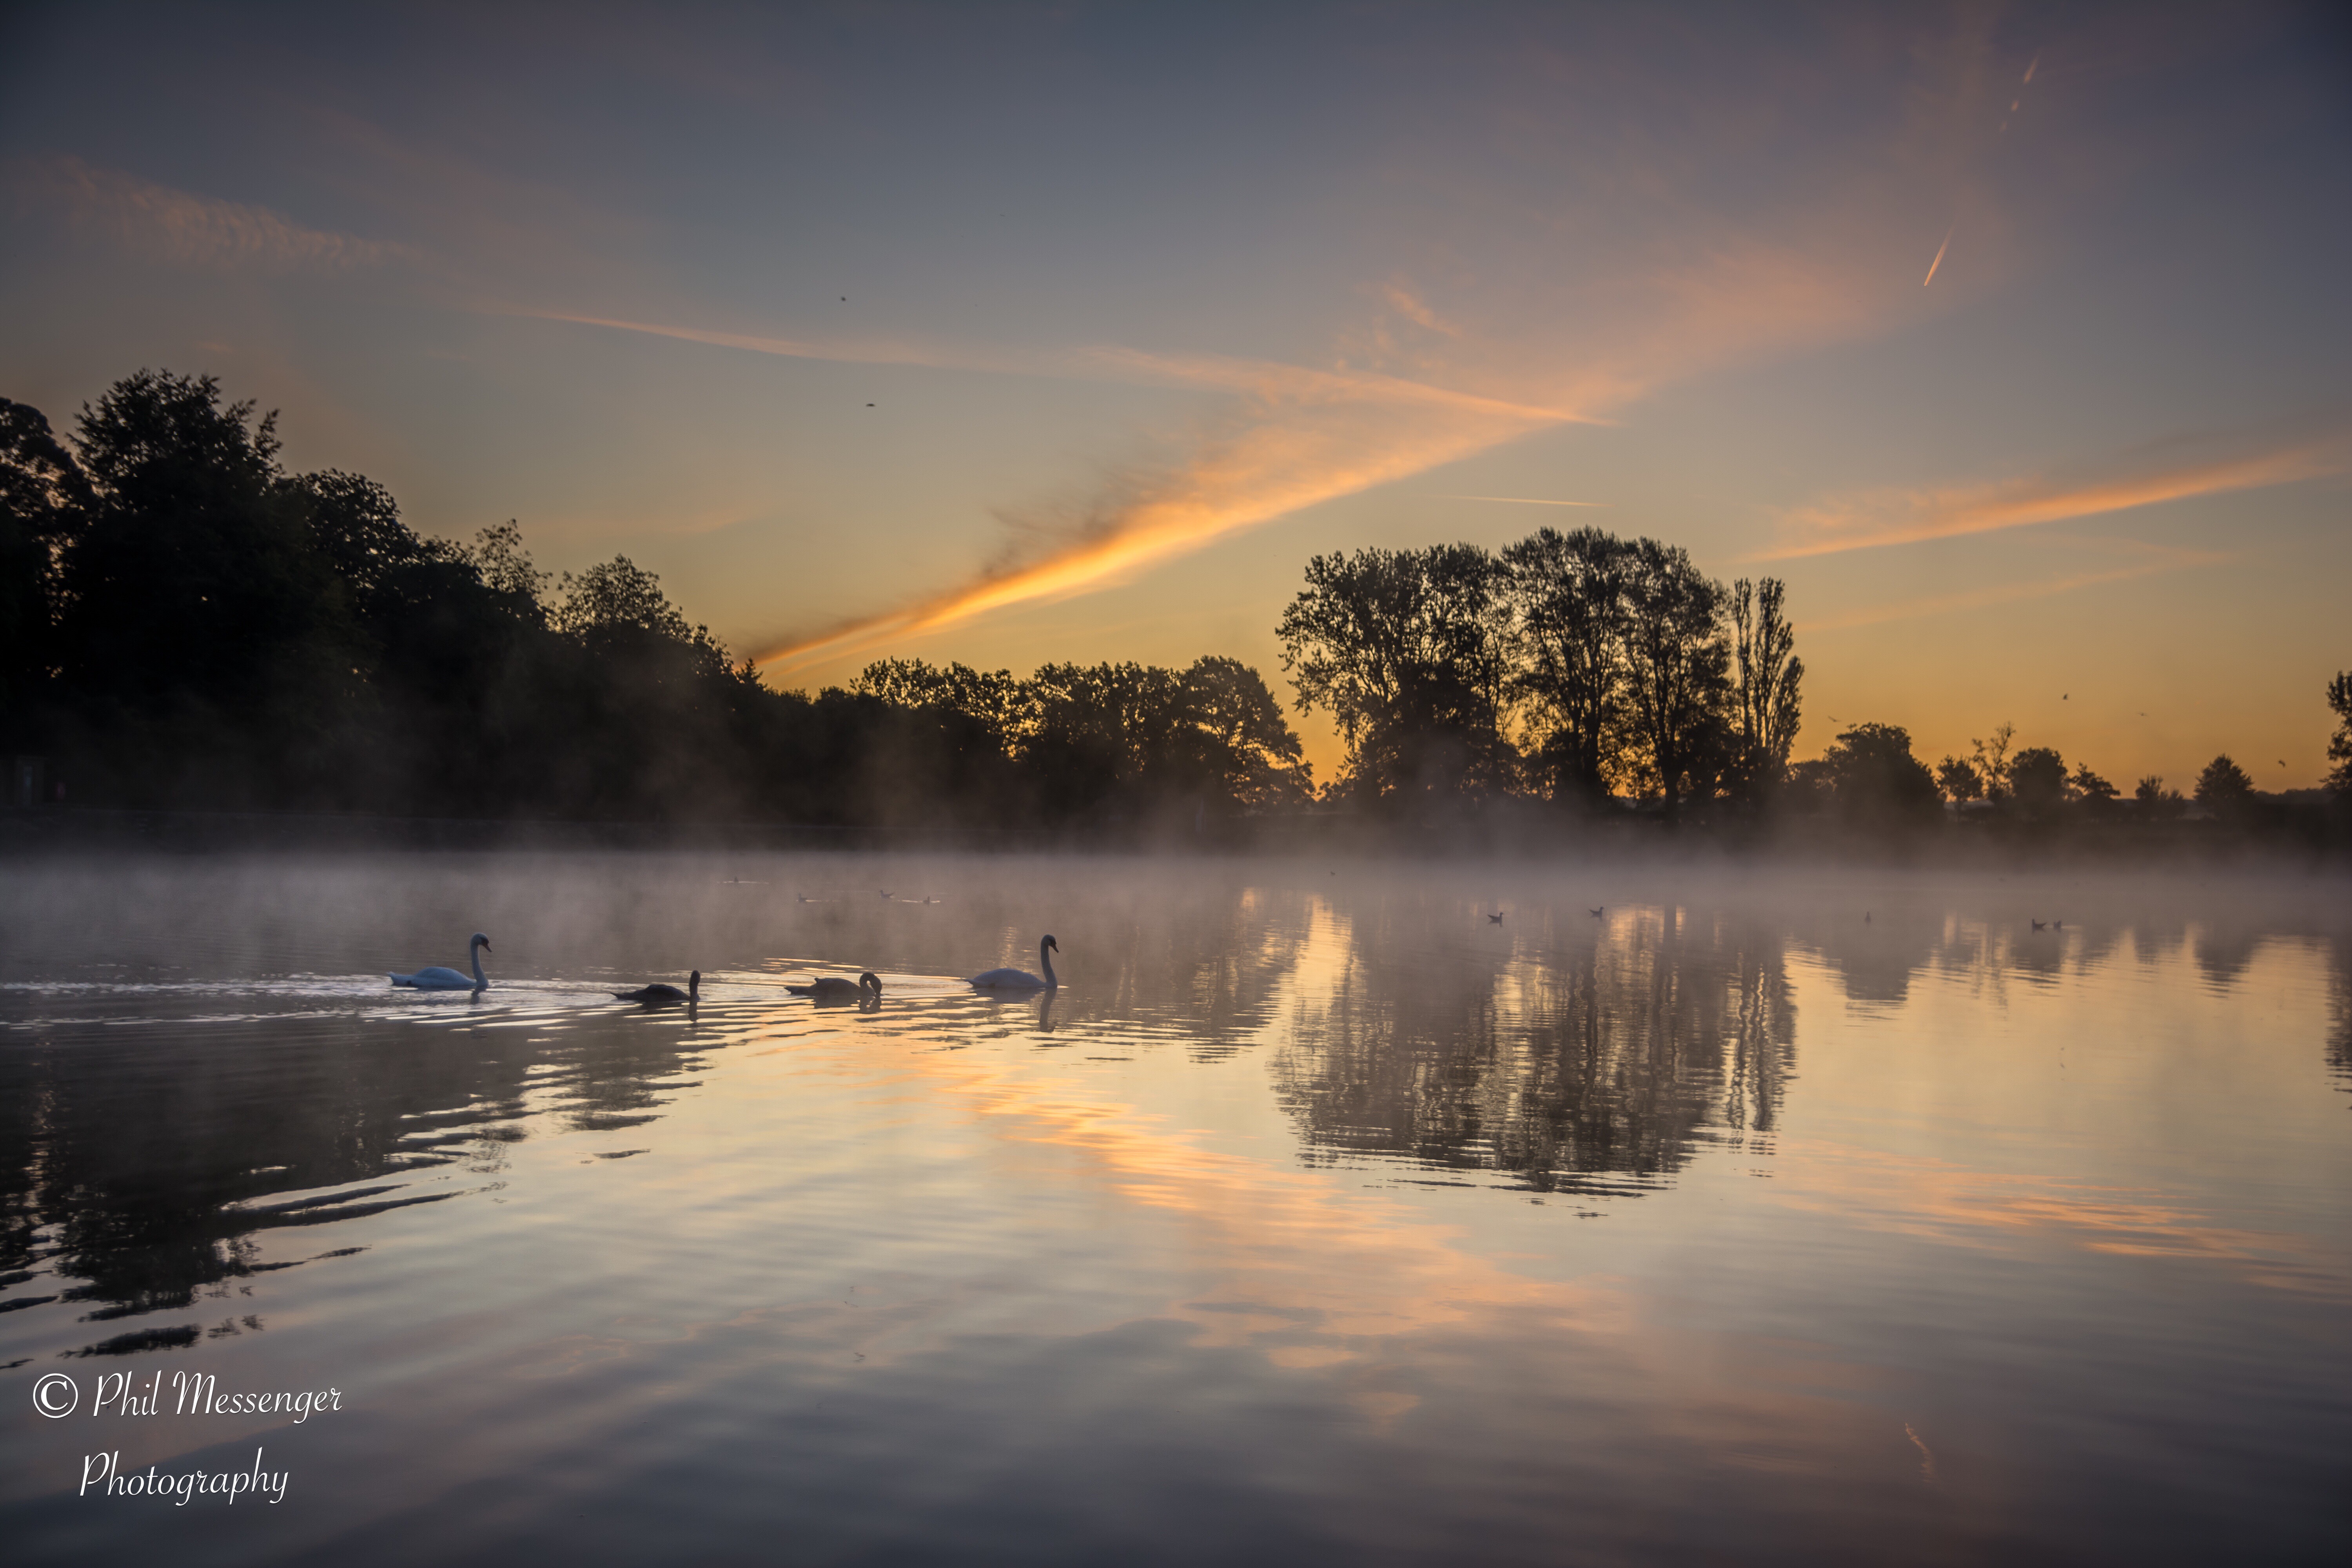 Tranquility at Coate Water, Swindon.